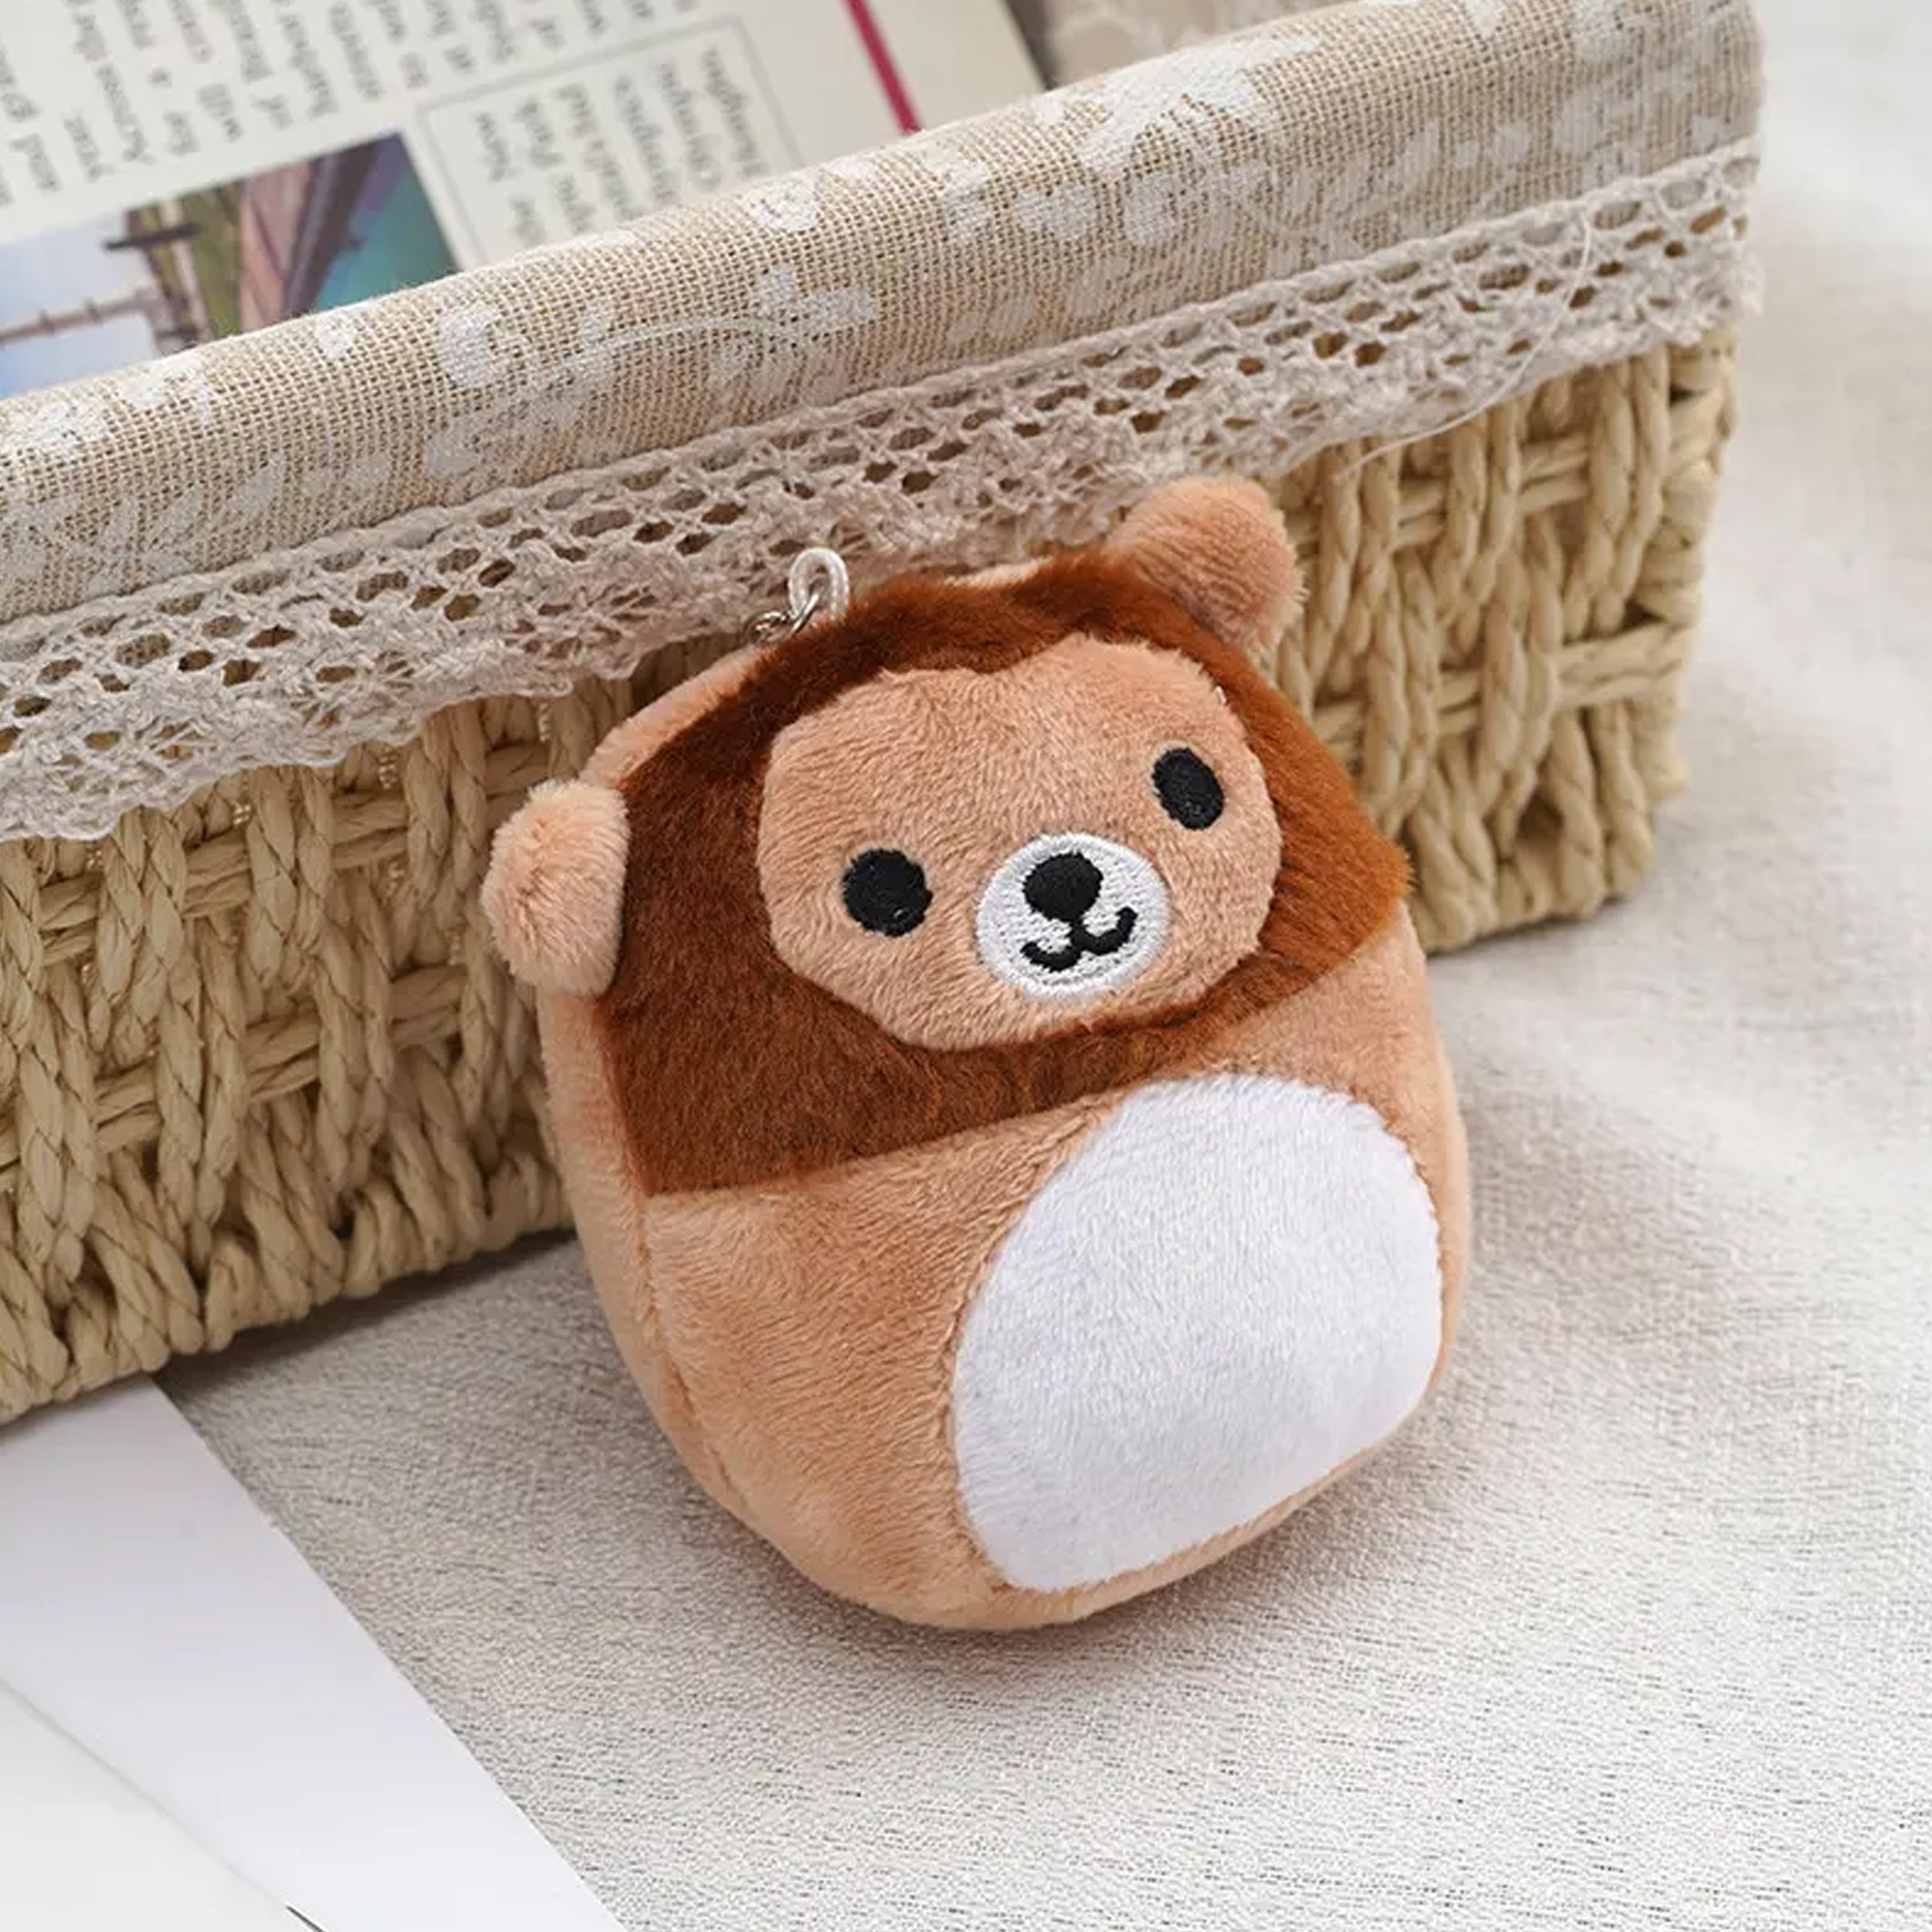 Cute Animals Style Soft Plush Keychains Toy for Kids